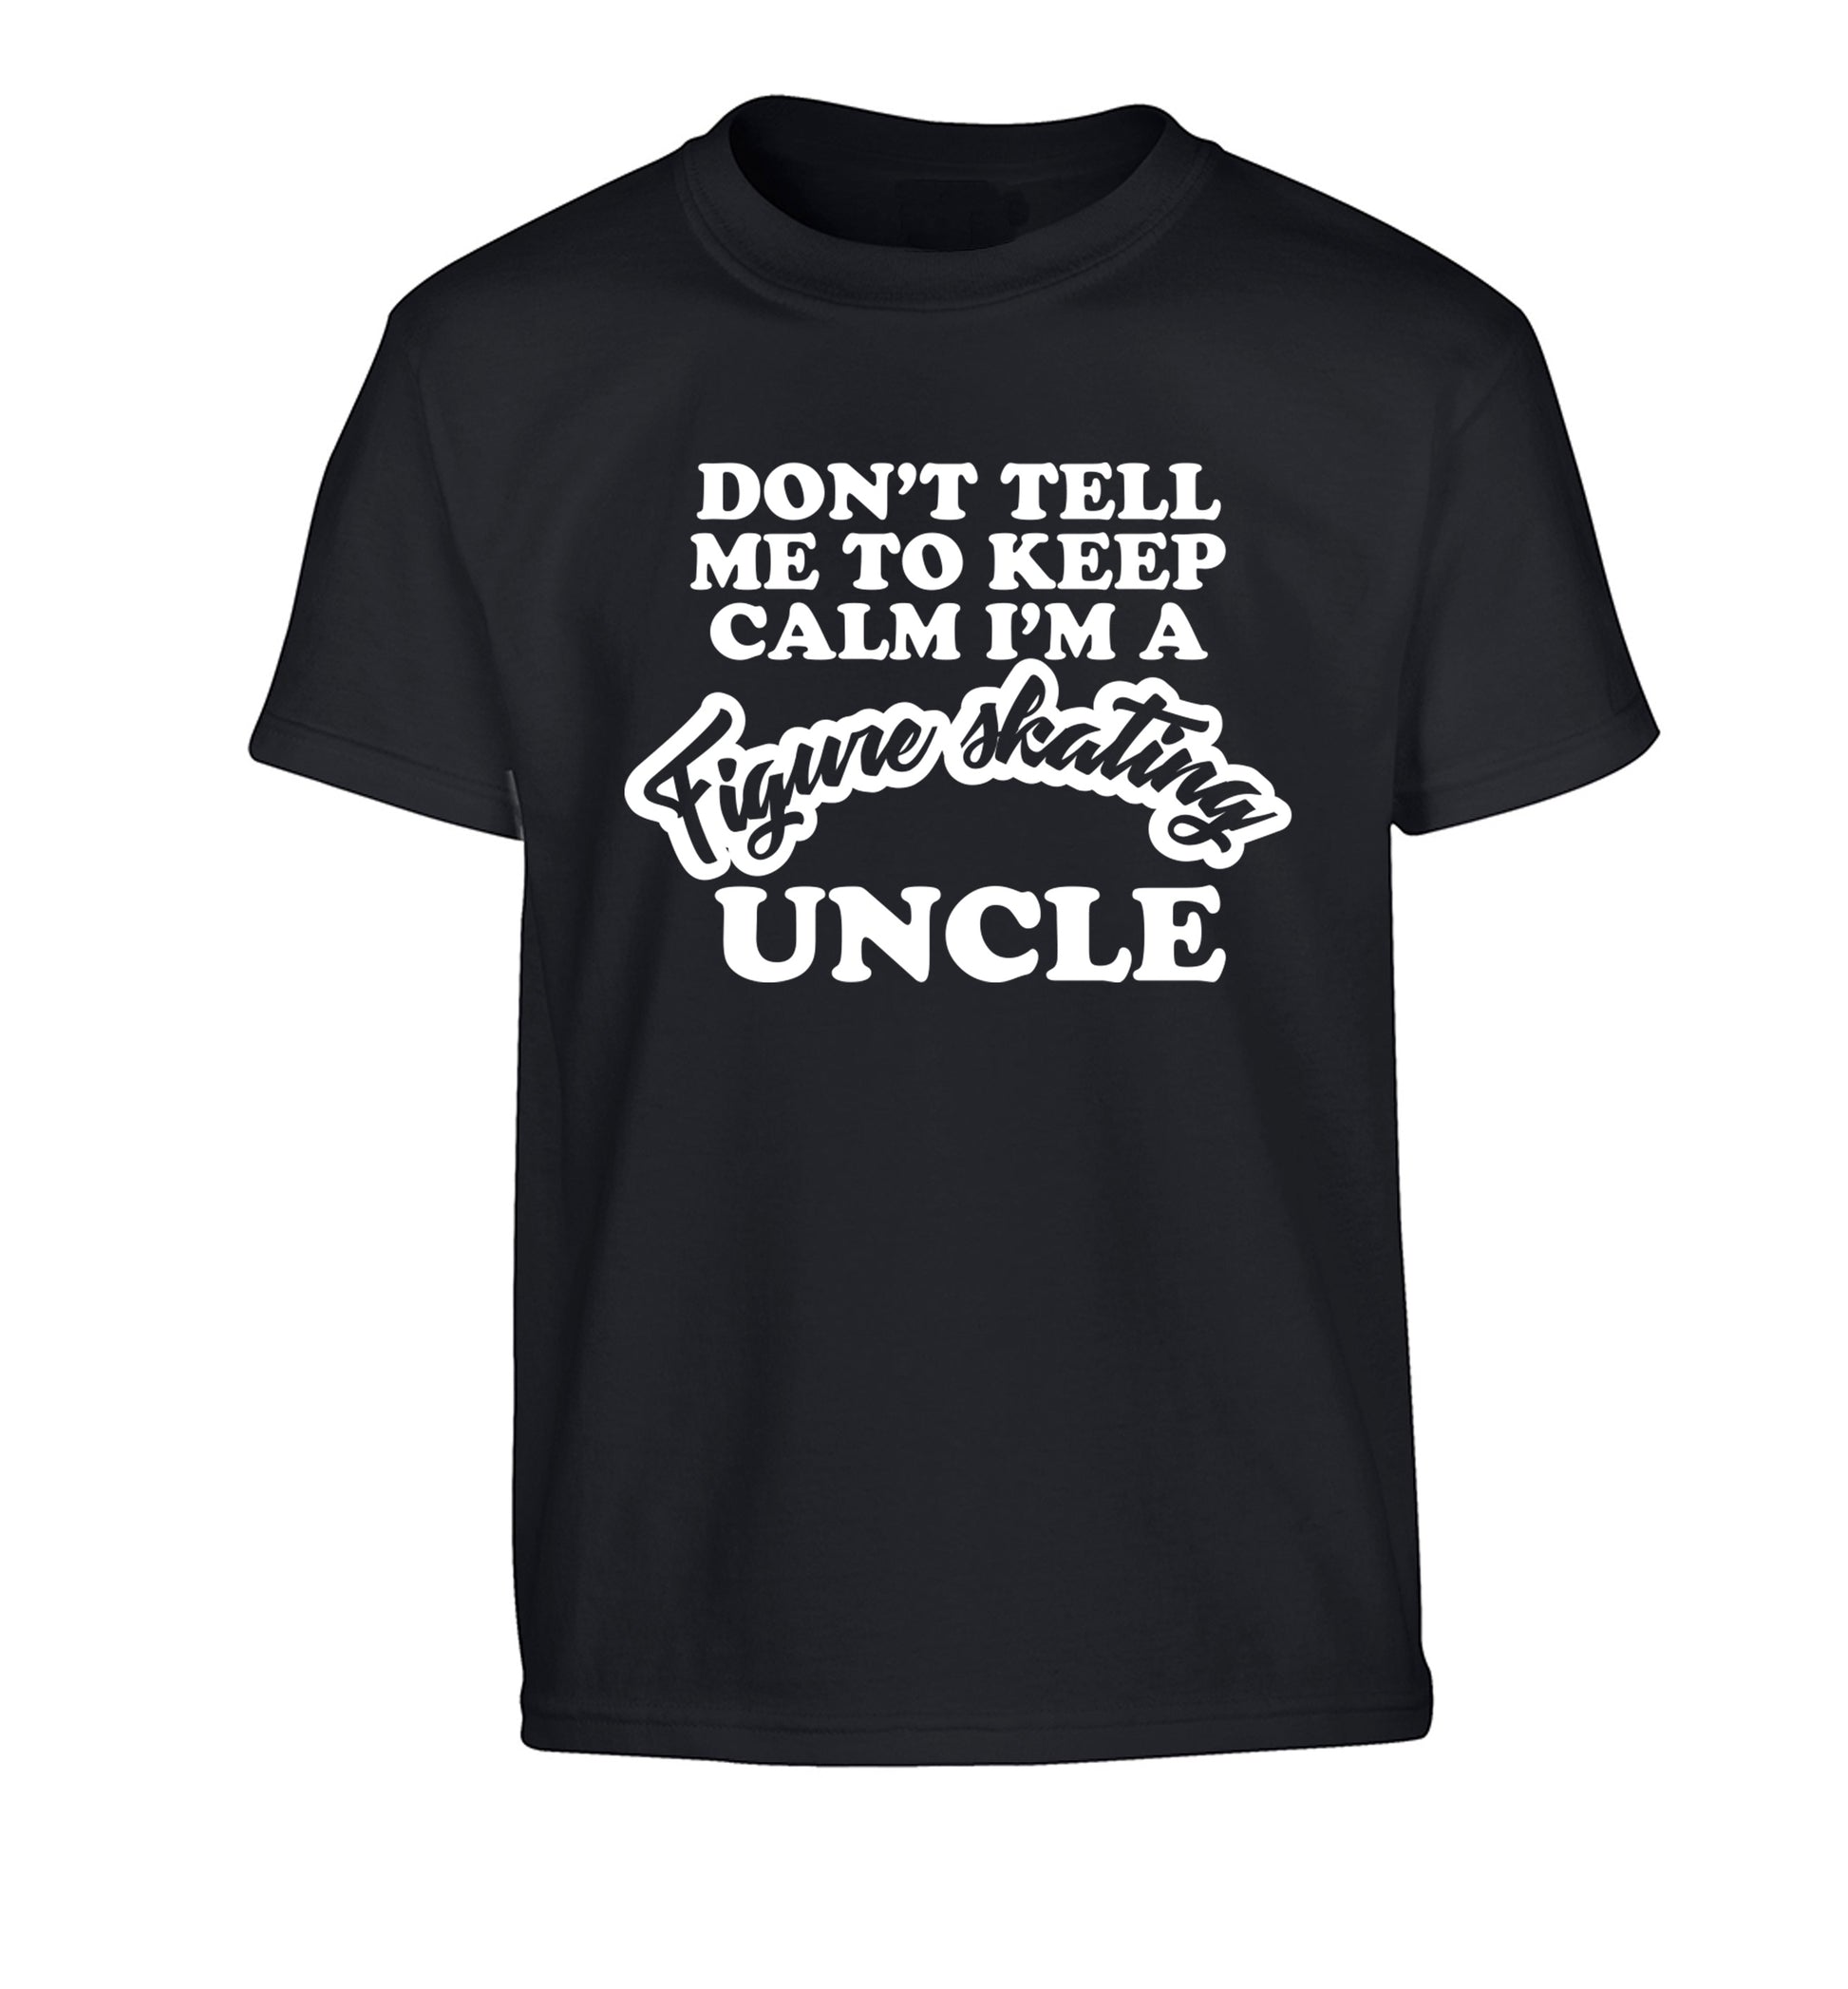 Don't tell me to keep calm I'm a figure skating uncle Children's black Tshirt 12-14 Years